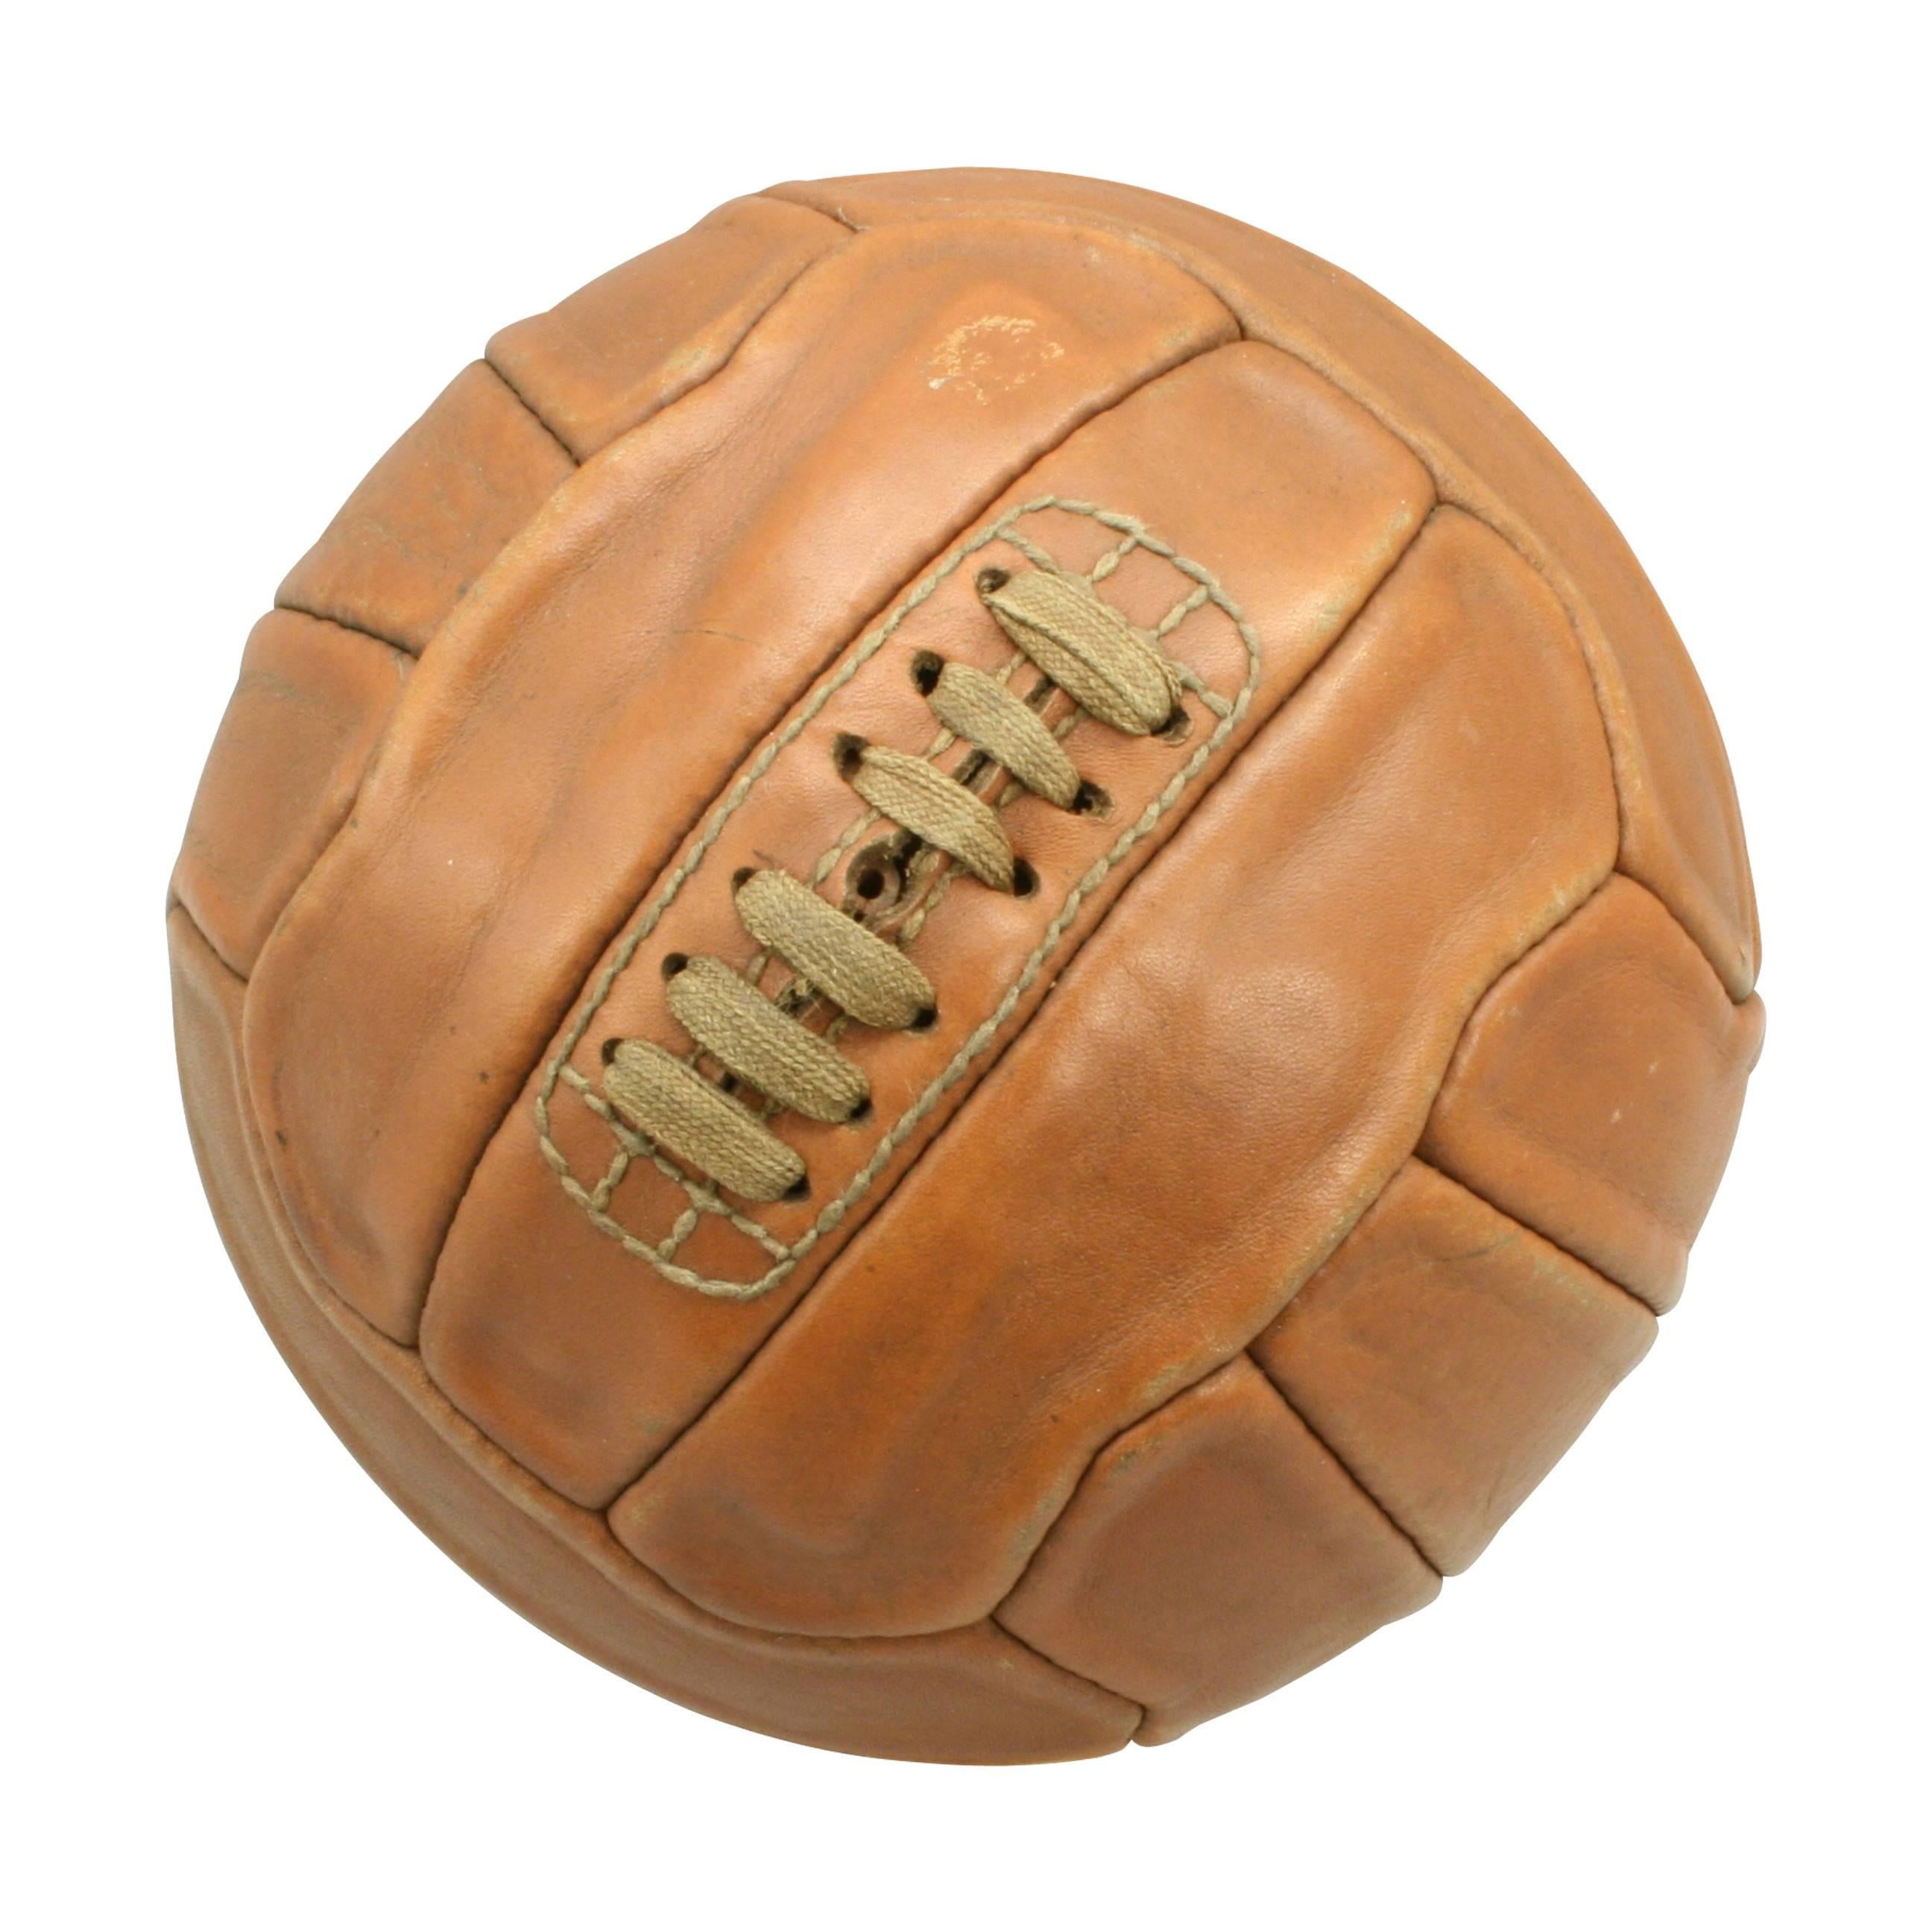 This is an excellent vintage football or soccer ball with traditional 18-panels in tan leather in very good original condition. The ball has a lace-up slit to the top to enable bladder inflation. This ball is as new and has never been used.